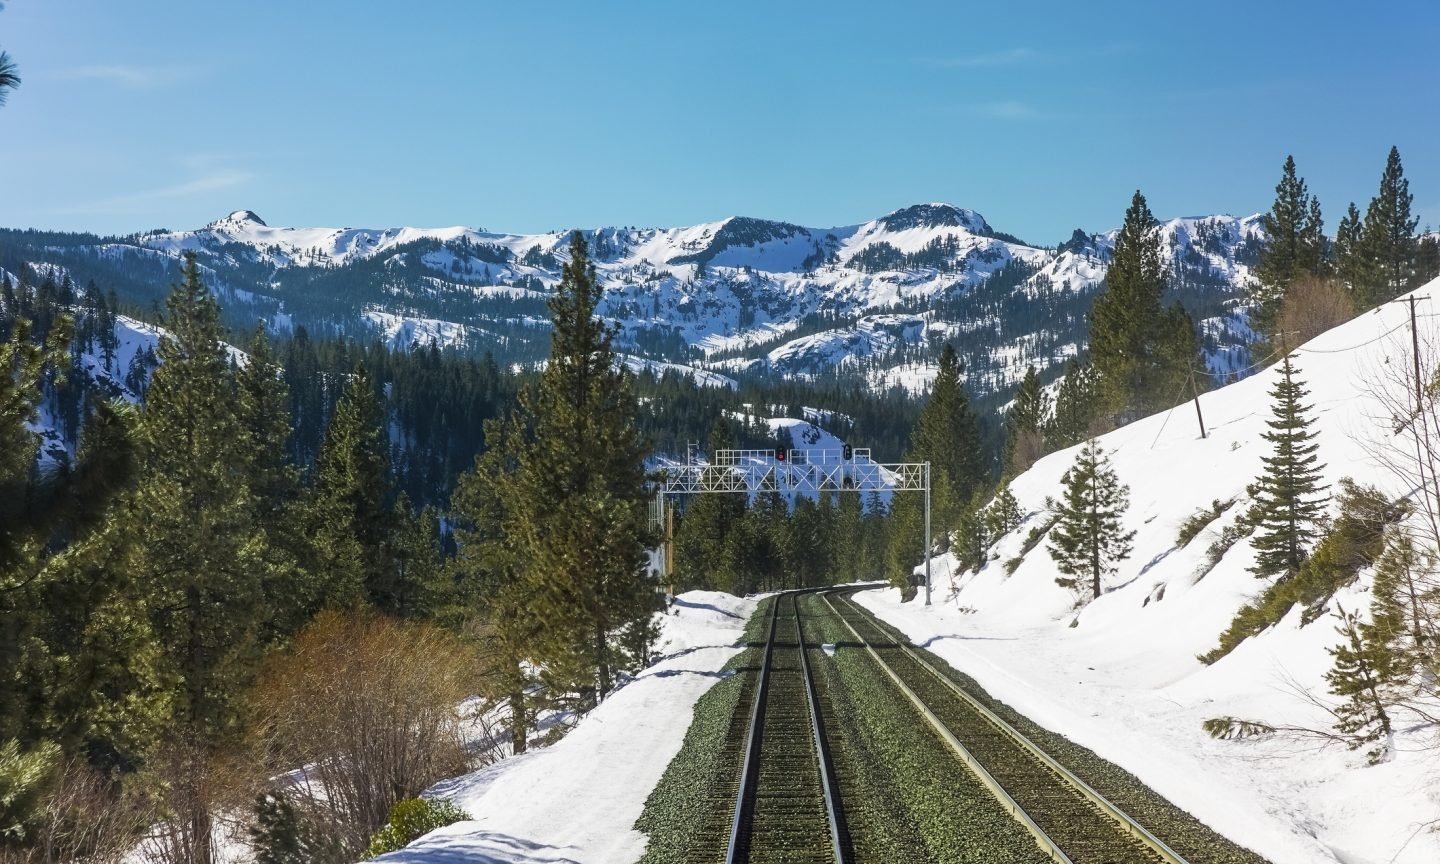 The Most Scenic Amtrak Routes Might Shock You – NerdWallet